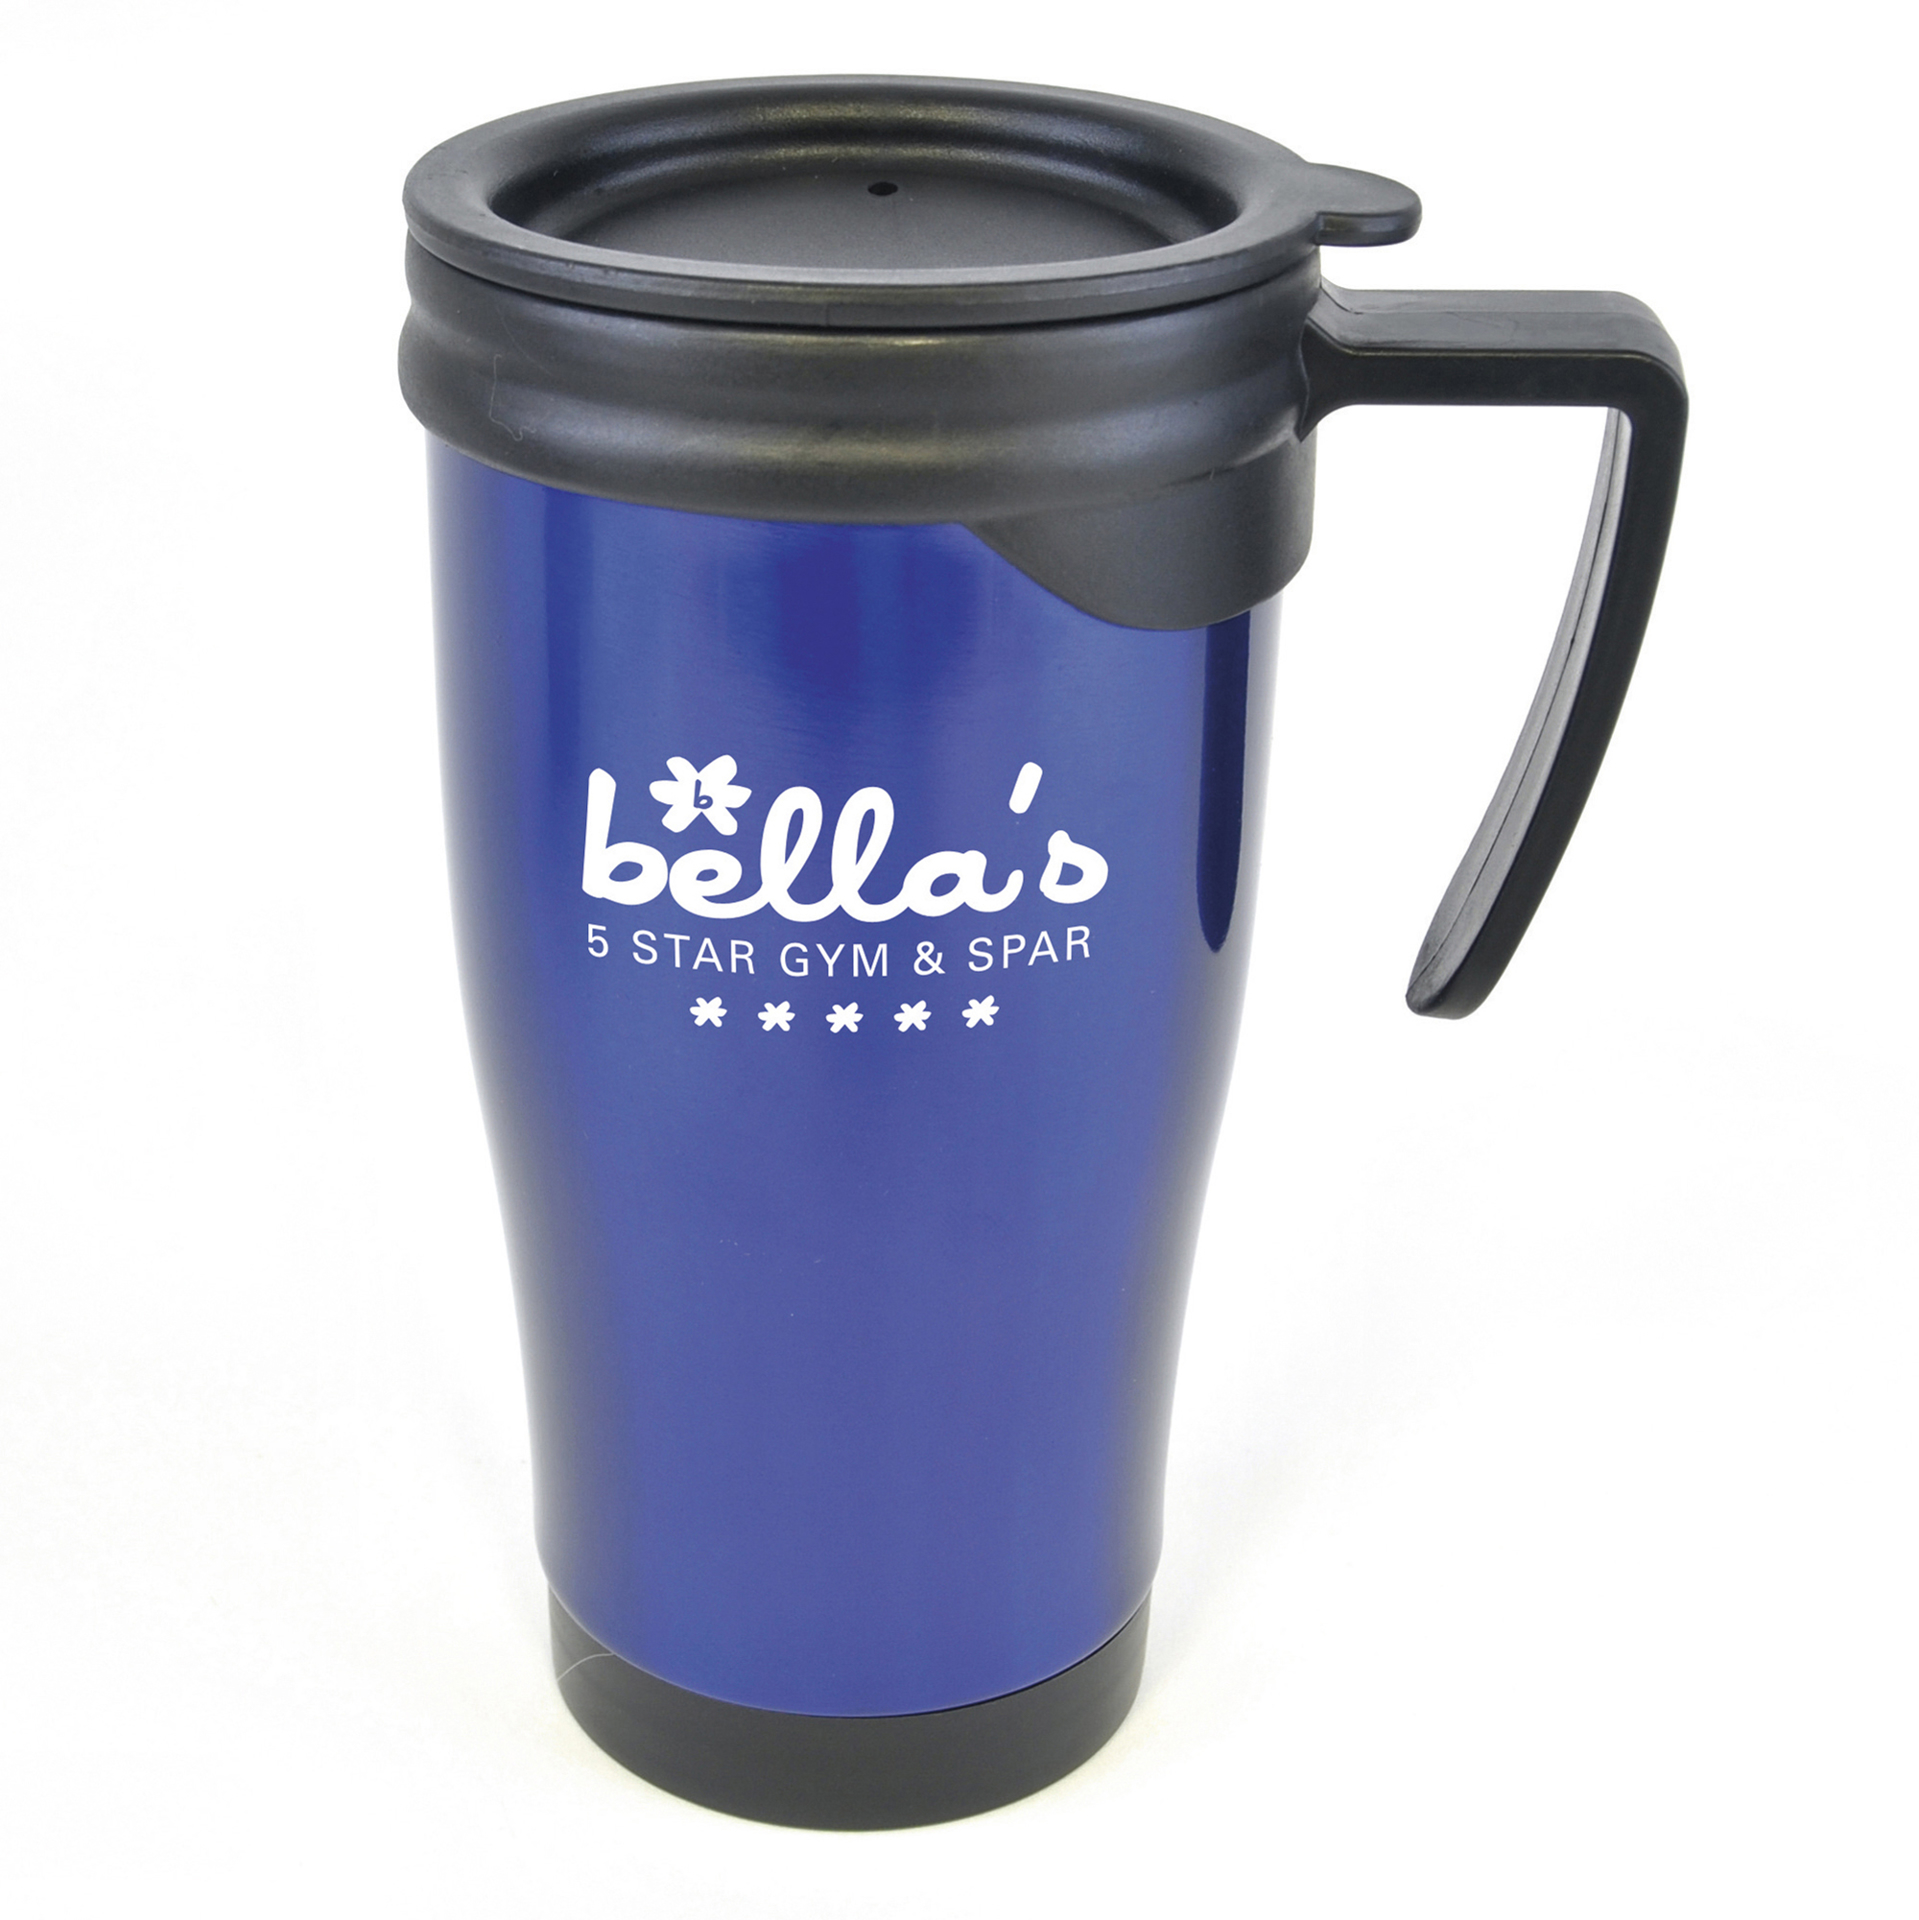 blue stainless steel mug with black handle and trim